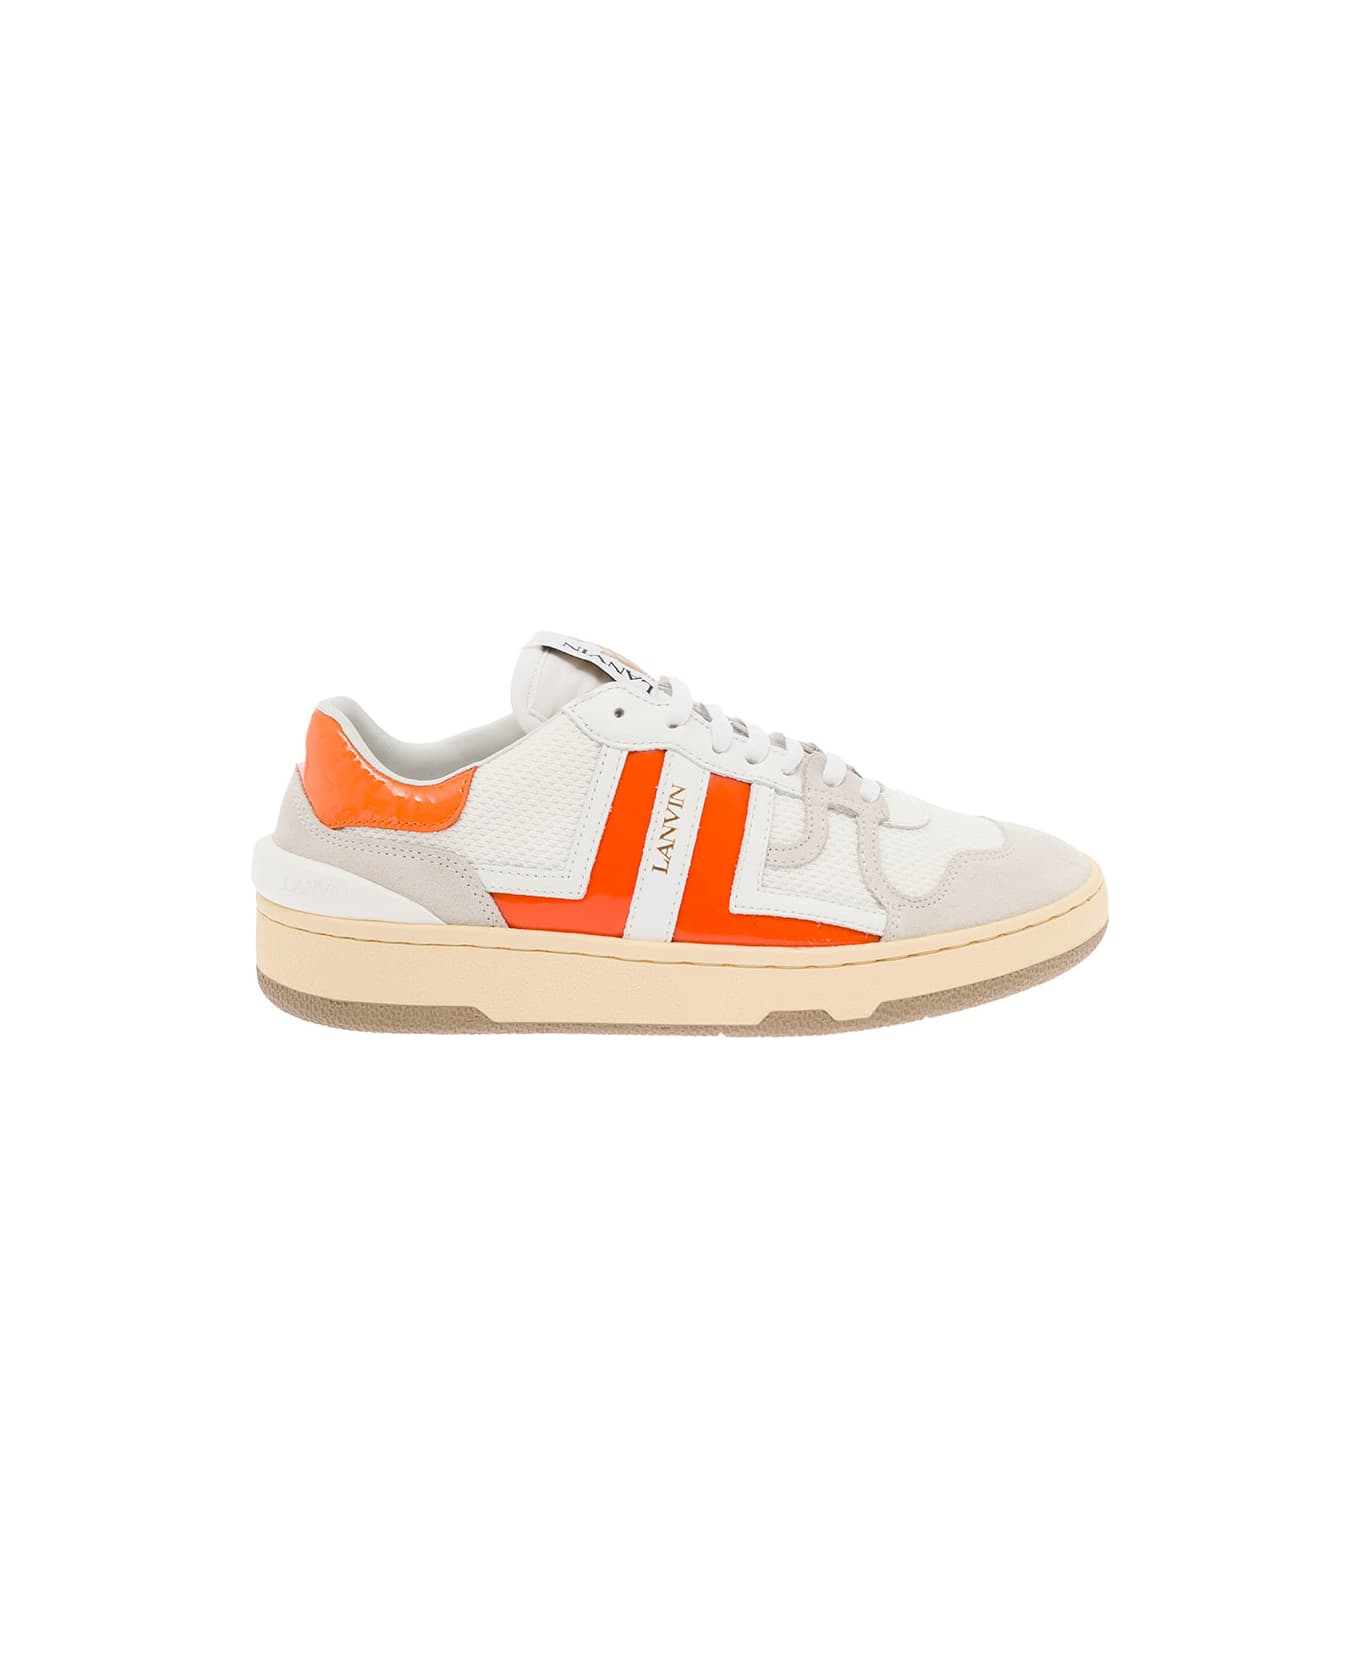 Lanvin Clay Low White And Orange Leather And Mesh  Sneaker Lanvin Woman - White